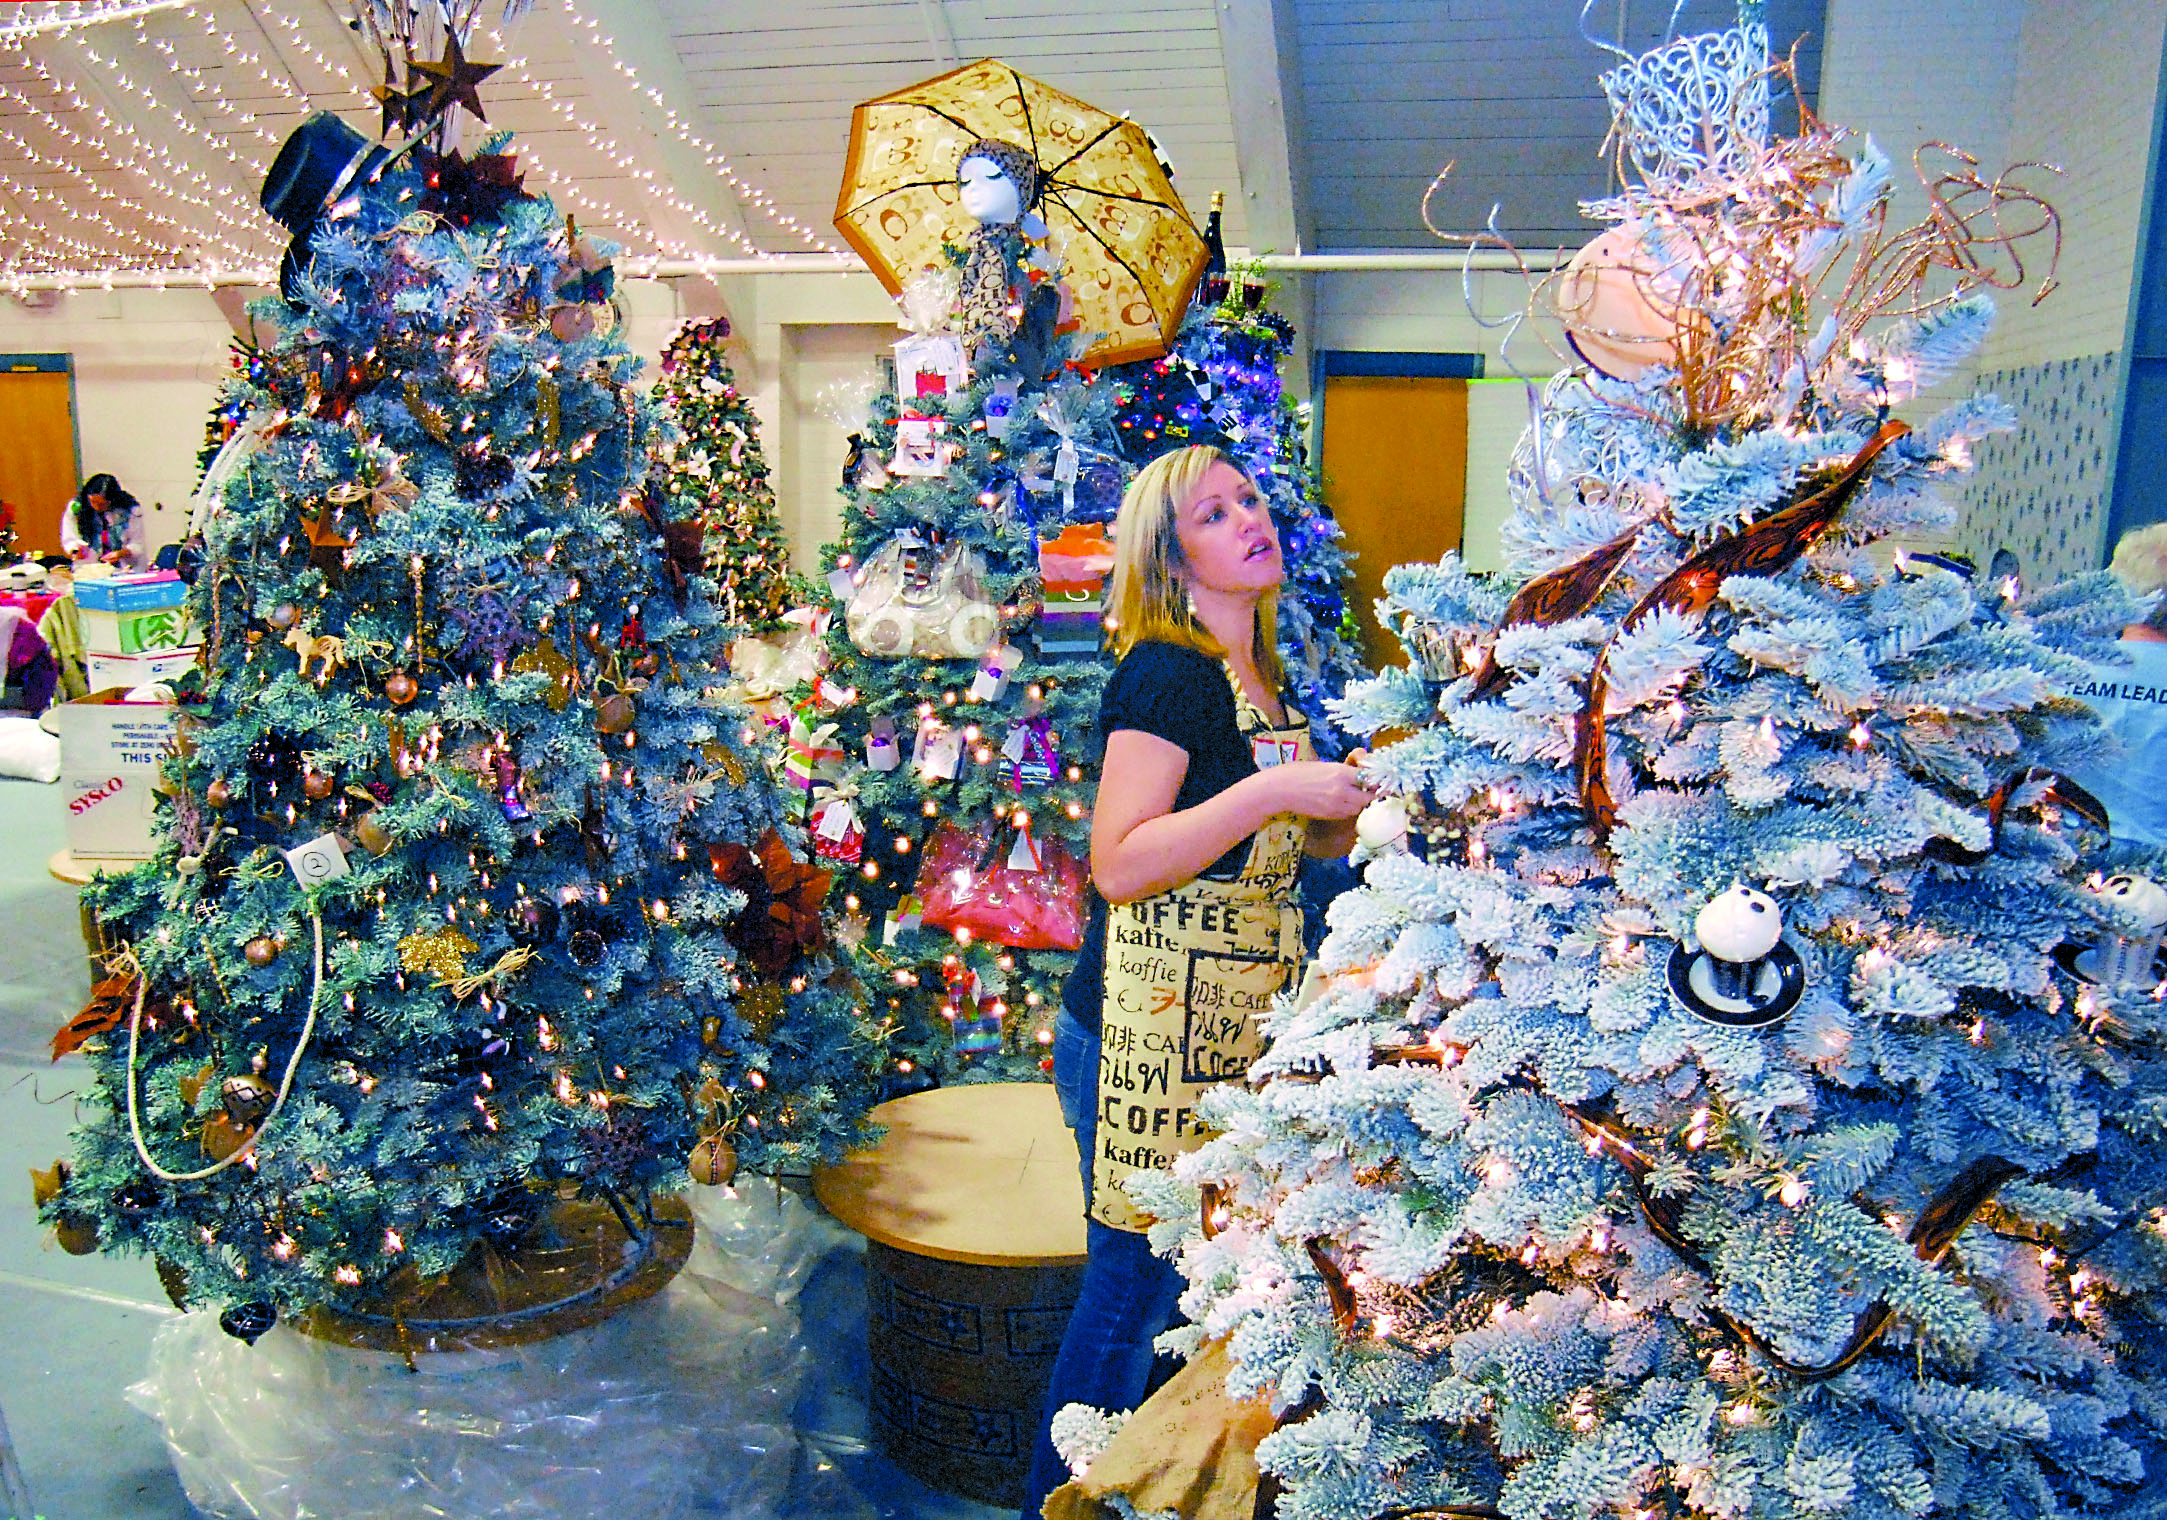 Jamie Scott of Port Angeles decorates a tree titled “Caffeinated Christmas” on Wednesday in preparation for this weekend's Festival of Trees at Vern Burton Community Center in Port Angeles. Keith Thorpe/Peninsula Daily News